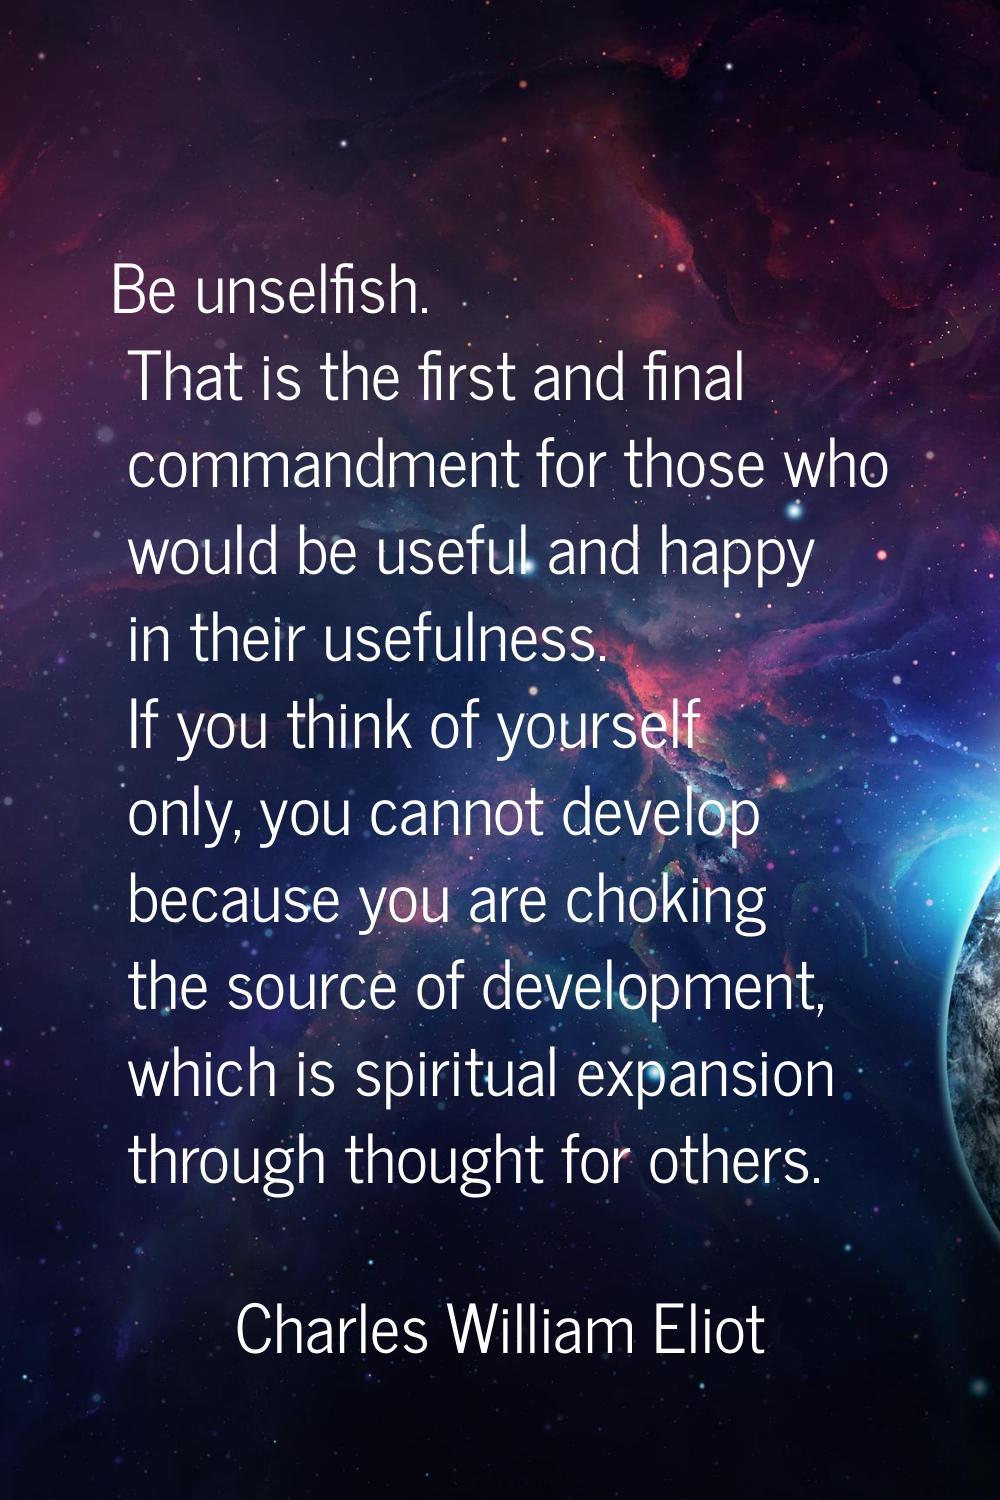 Be unselfish. That is the first and final commandment for those who would be useful and happy in th